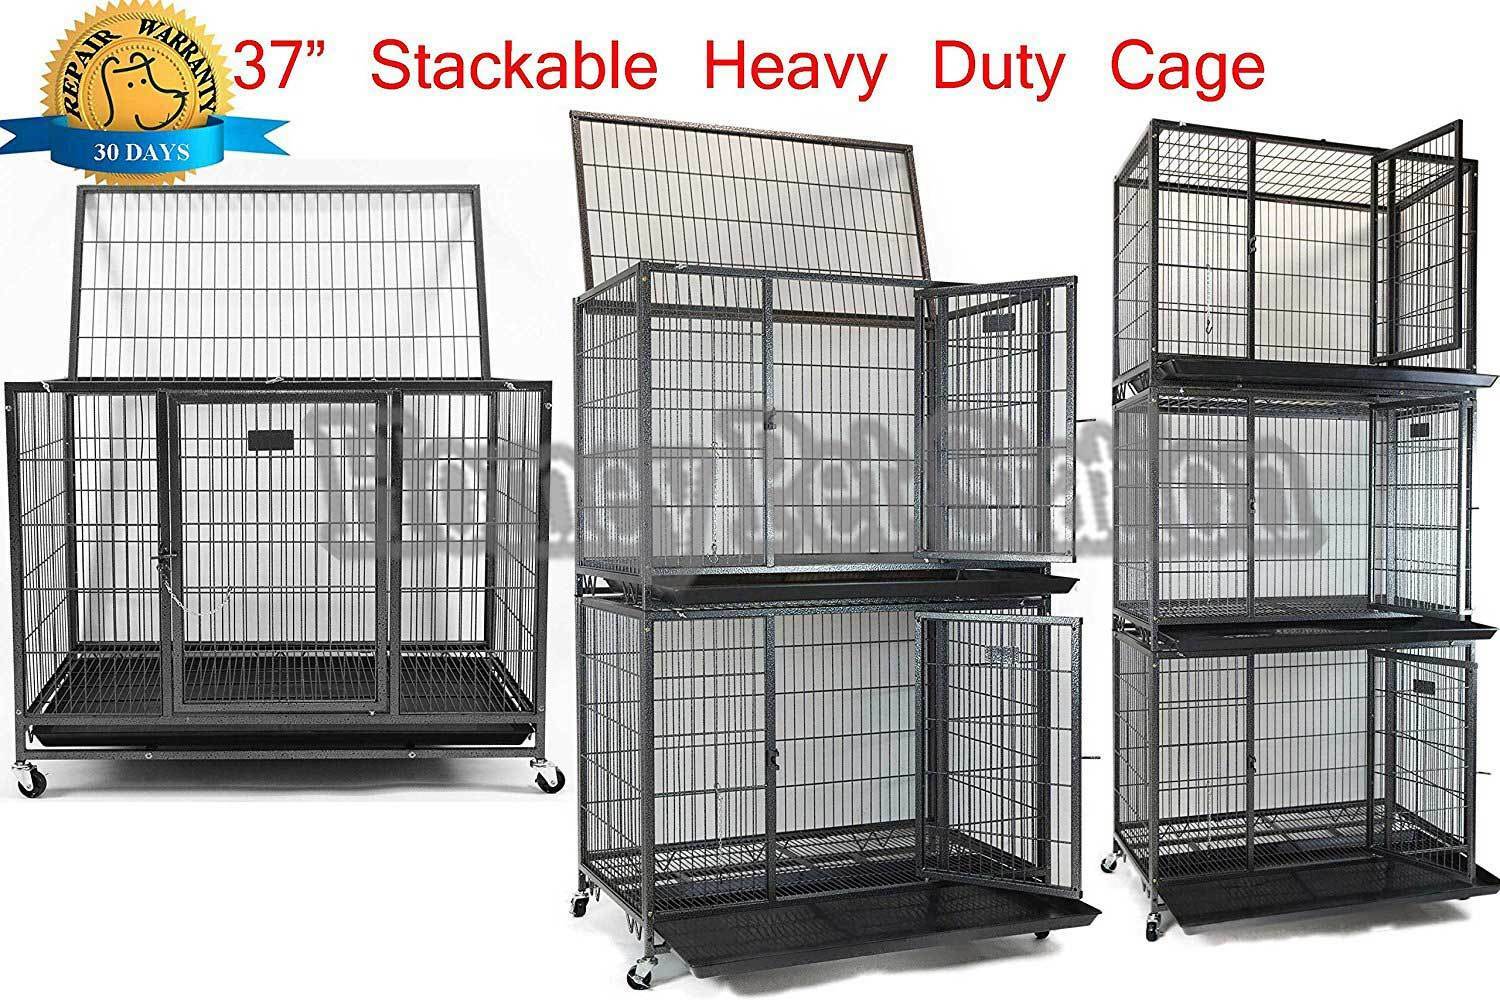 New 37" Homey Pet Stackable Open Top Heavy Duty Dog Metal Cage Kennel W/ Tray